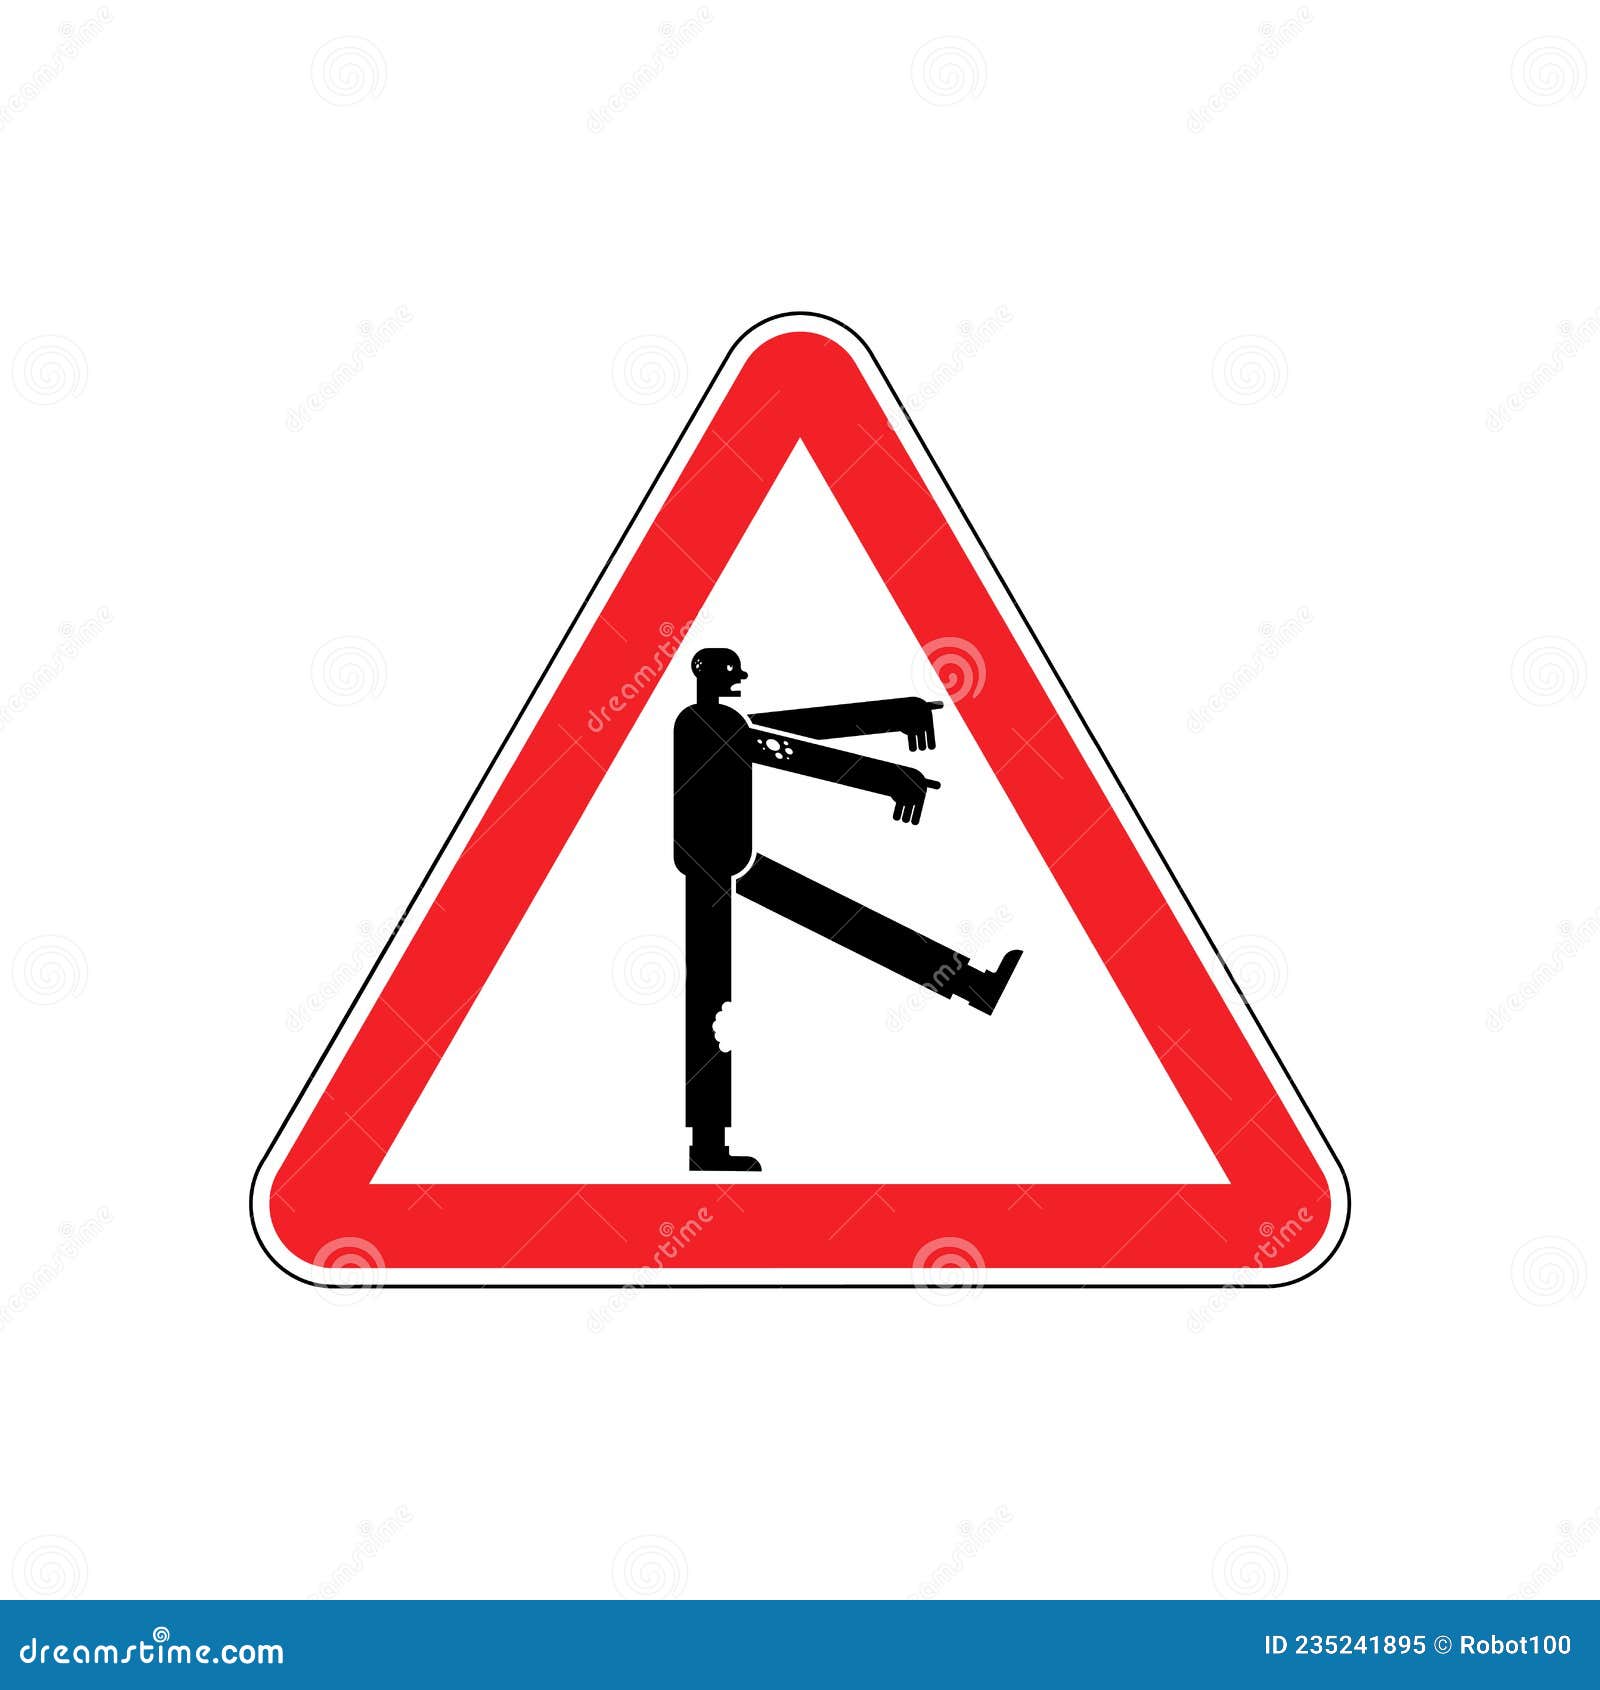 attention zombie. caution zombi. red triangle road sign